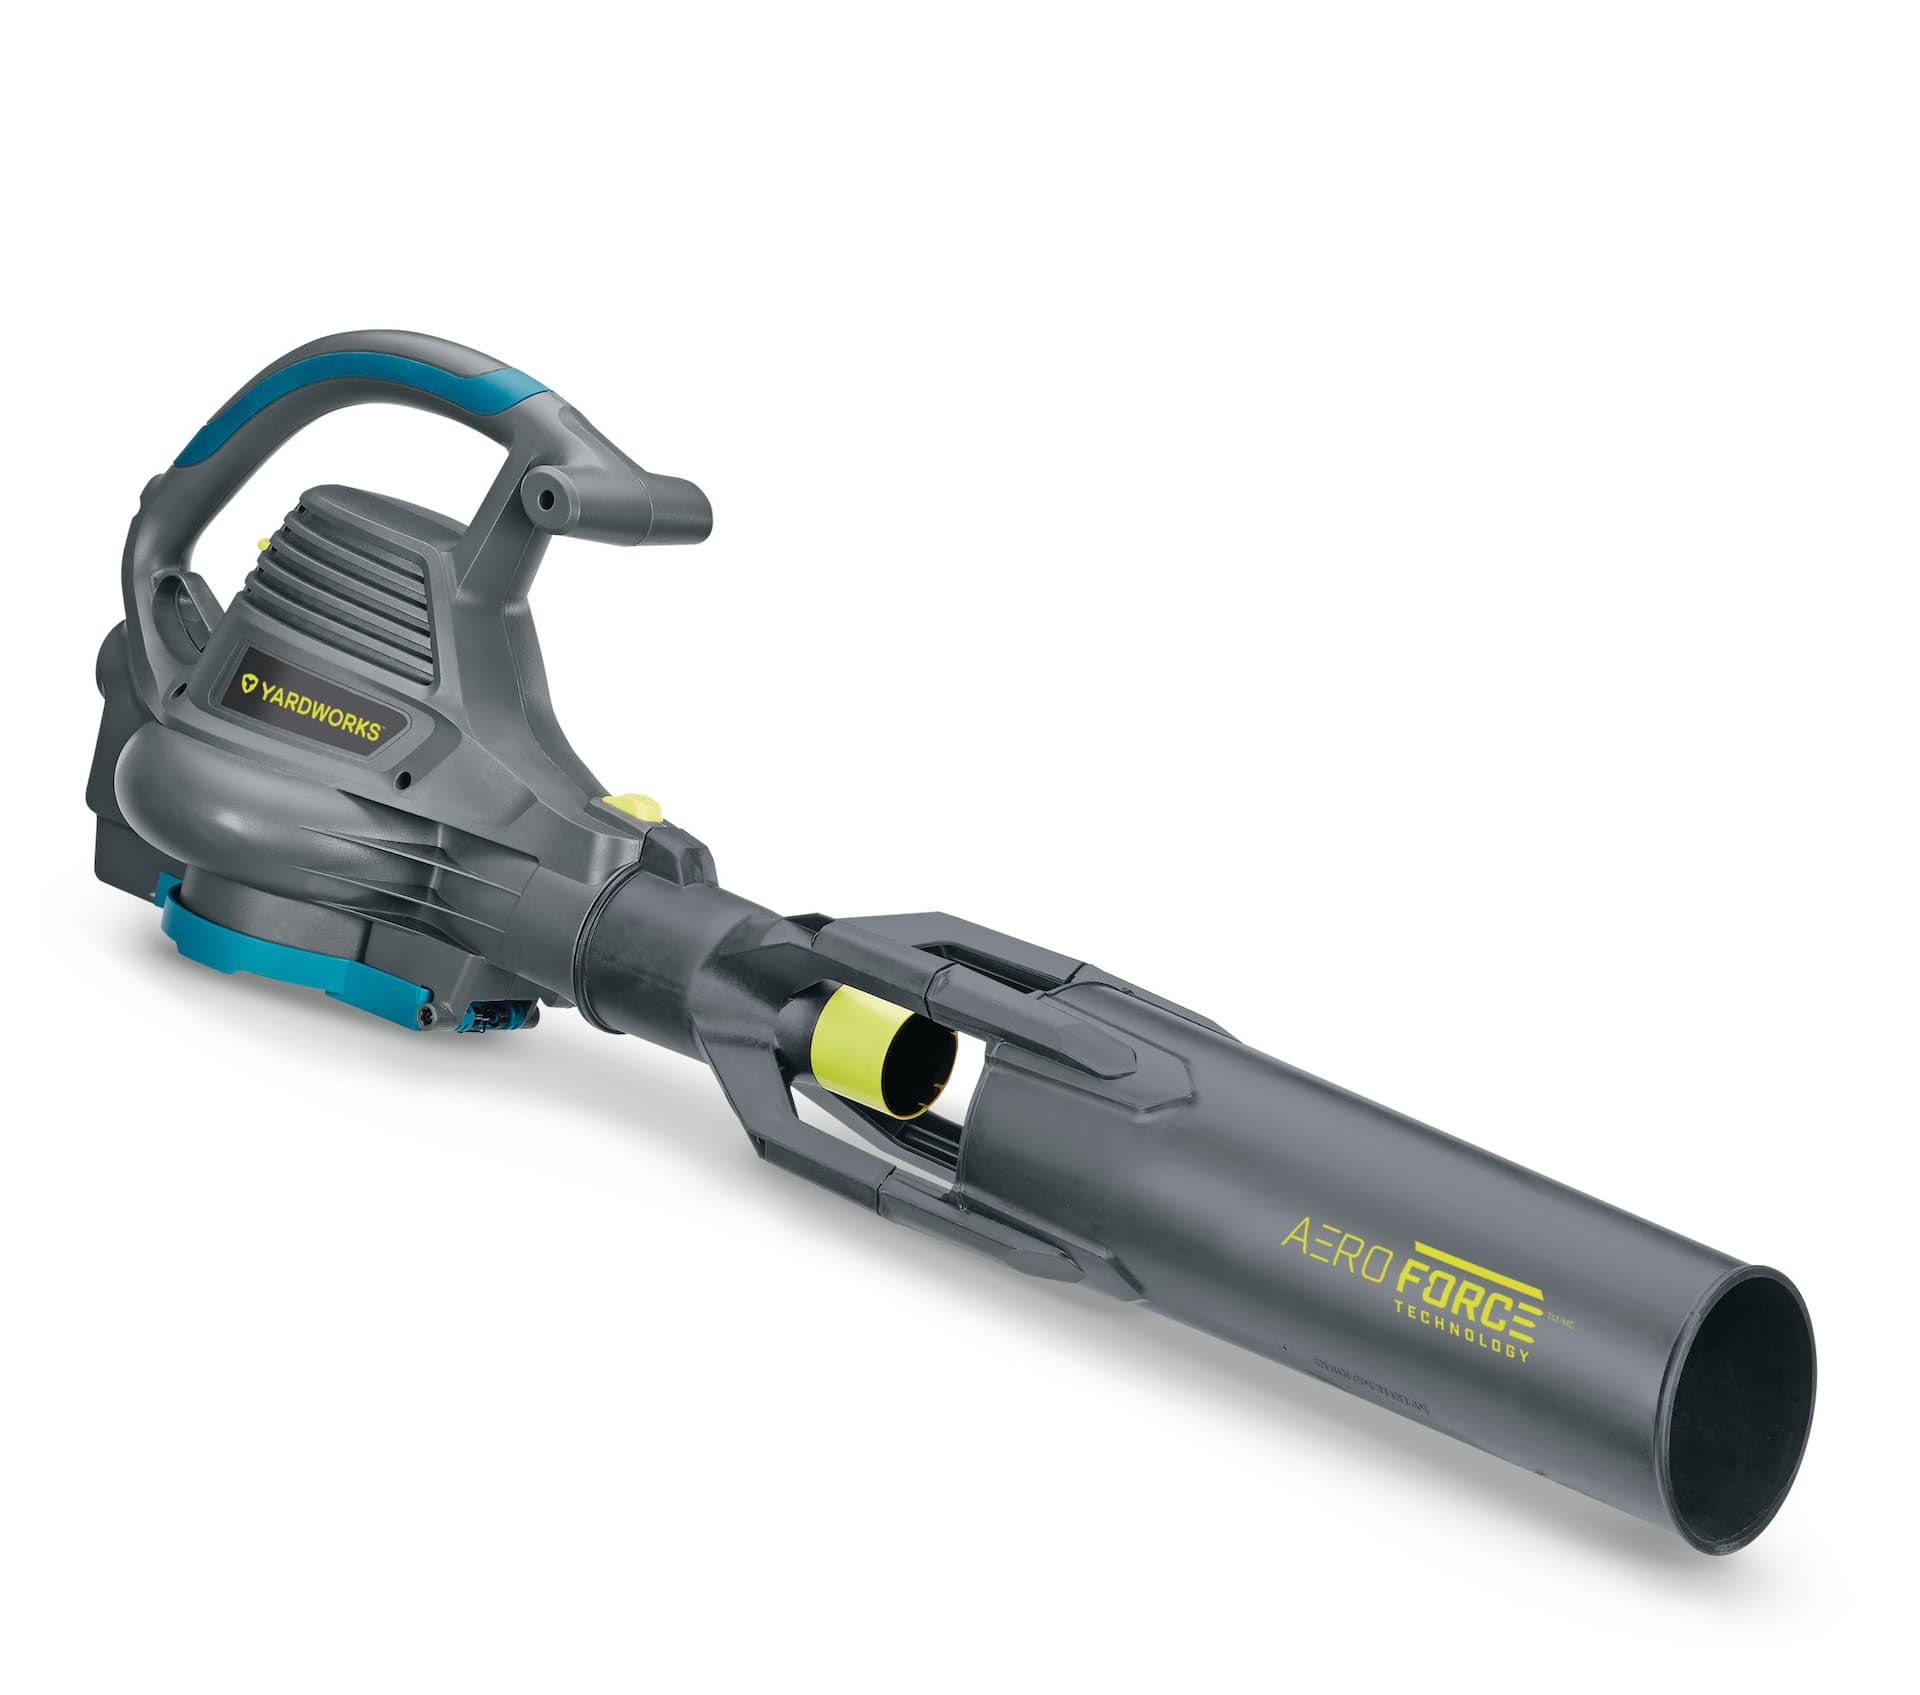 https://media-www.canadiantire.ca/product/seasonal-gardening/outdoor-tools/hand-held-outdoor-power-tools/0603775/yardworks-12a-blower-vac-with-aero-force-technology-09c31363-1c05-4650-bdc0-3067f1798aa5-jpgrendition.jpg